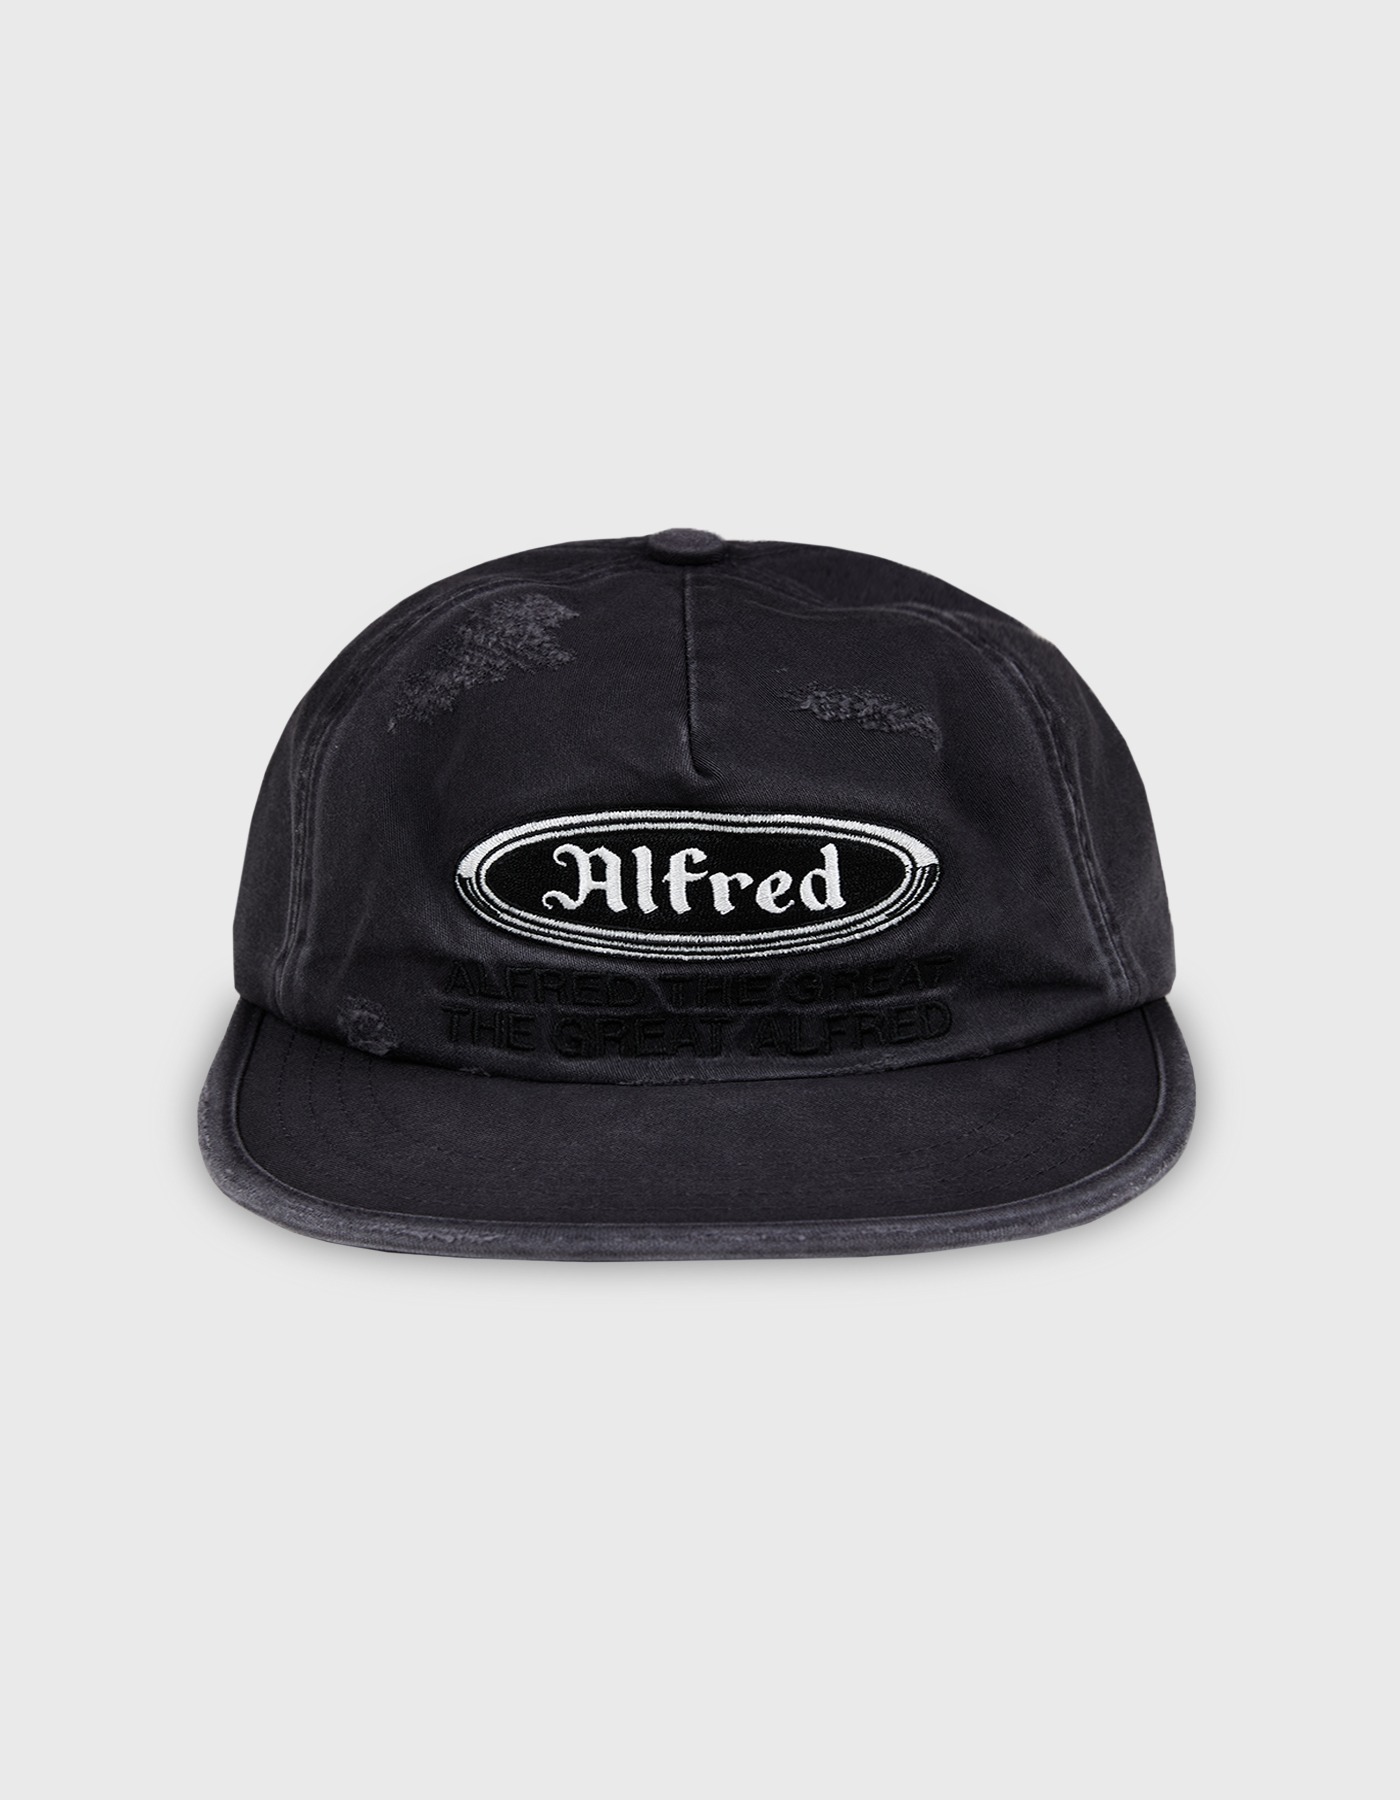 FRED DESTROYED WORK CAP / Charcoal